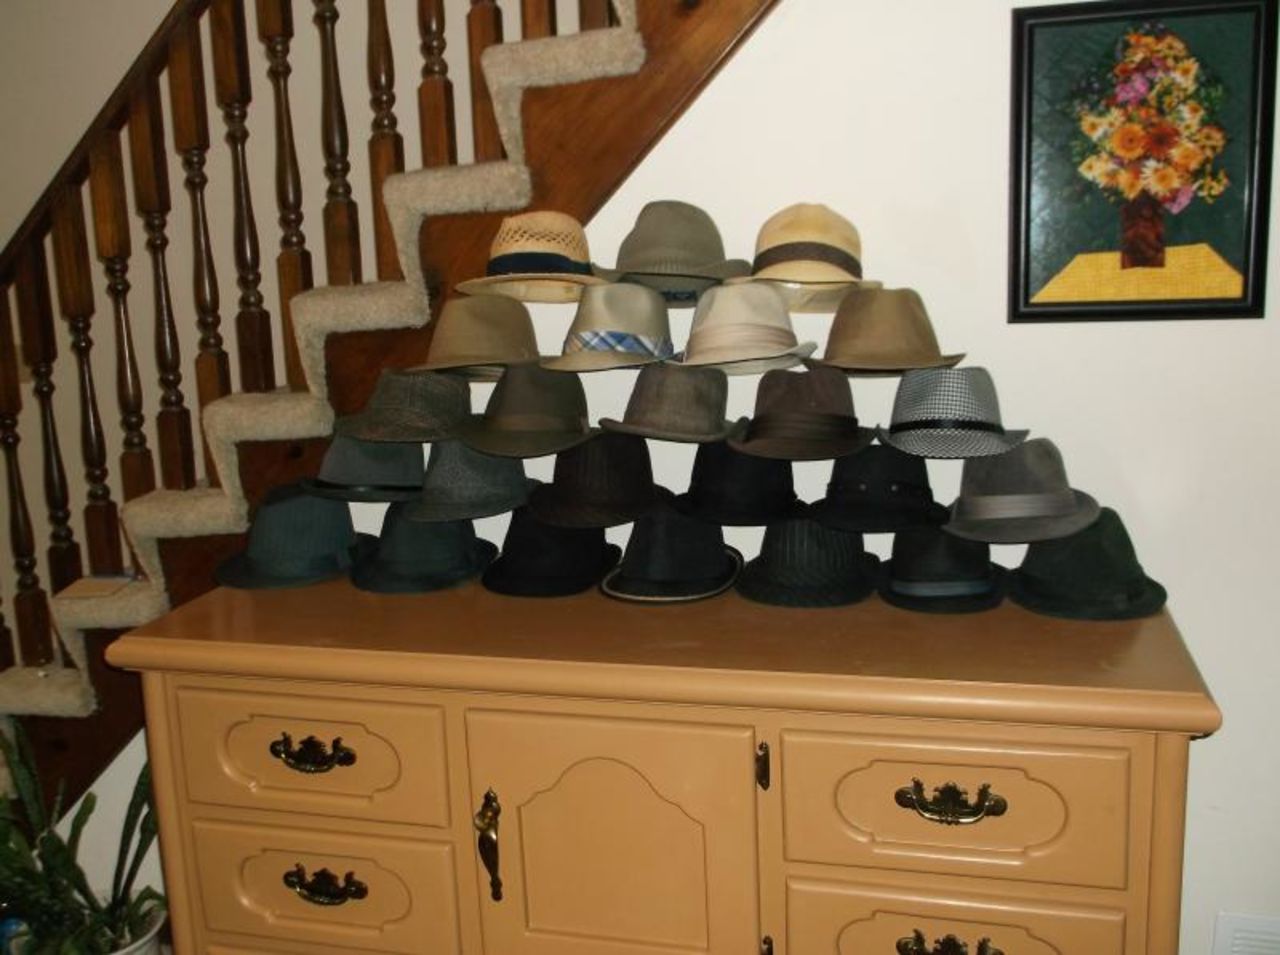 "At first, I just owned a couple of Fedoras, but then I bought a couple more. And, then I guess I got infected by the female shopping gene because, despite being extremely cheap, I got up to about a dozen hats," he wrote on the site. "I finally stopped at 25 when I realized I wasn't going to be around in another 14 months. Besides, I had just about covered all the colors."